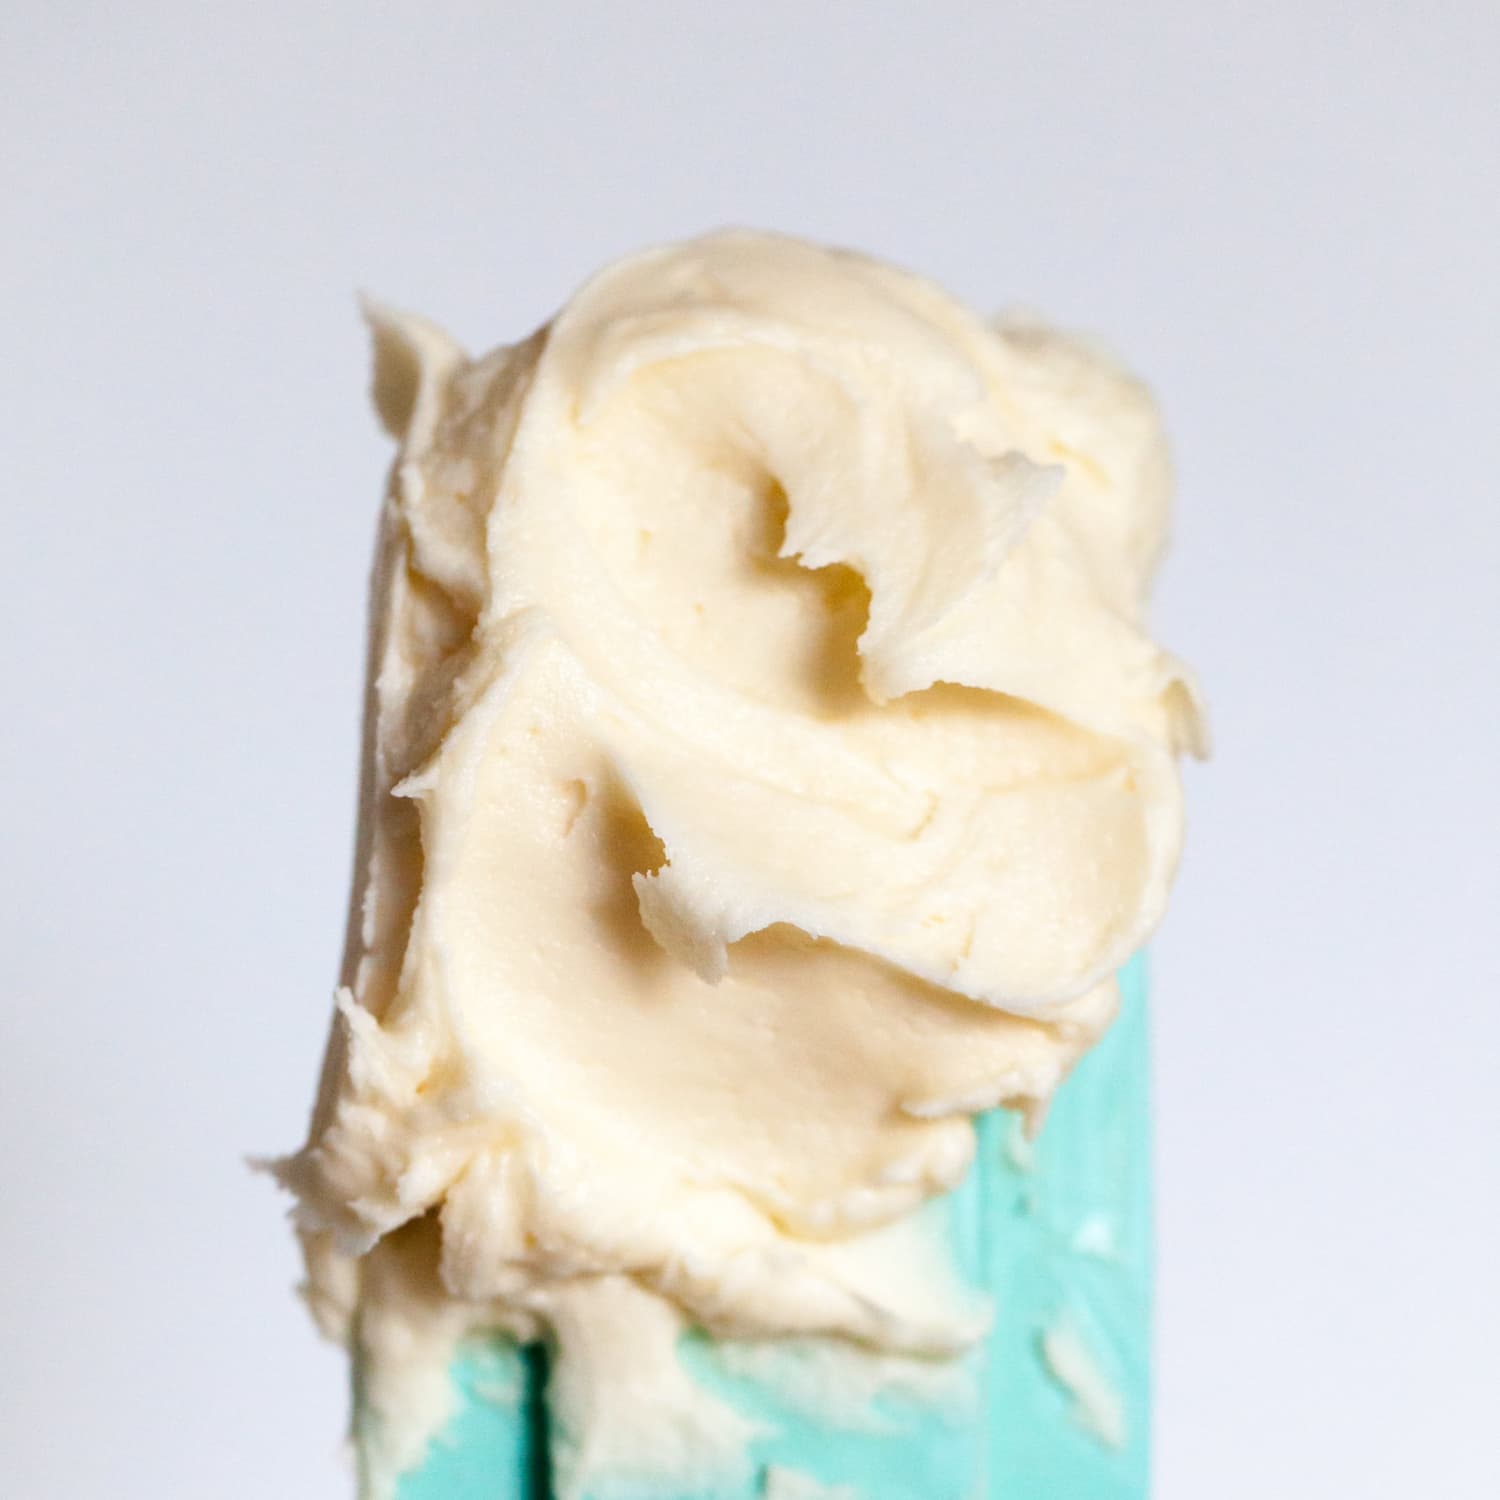 Try This Clever Hack for Making Super Vibrant Buttercream